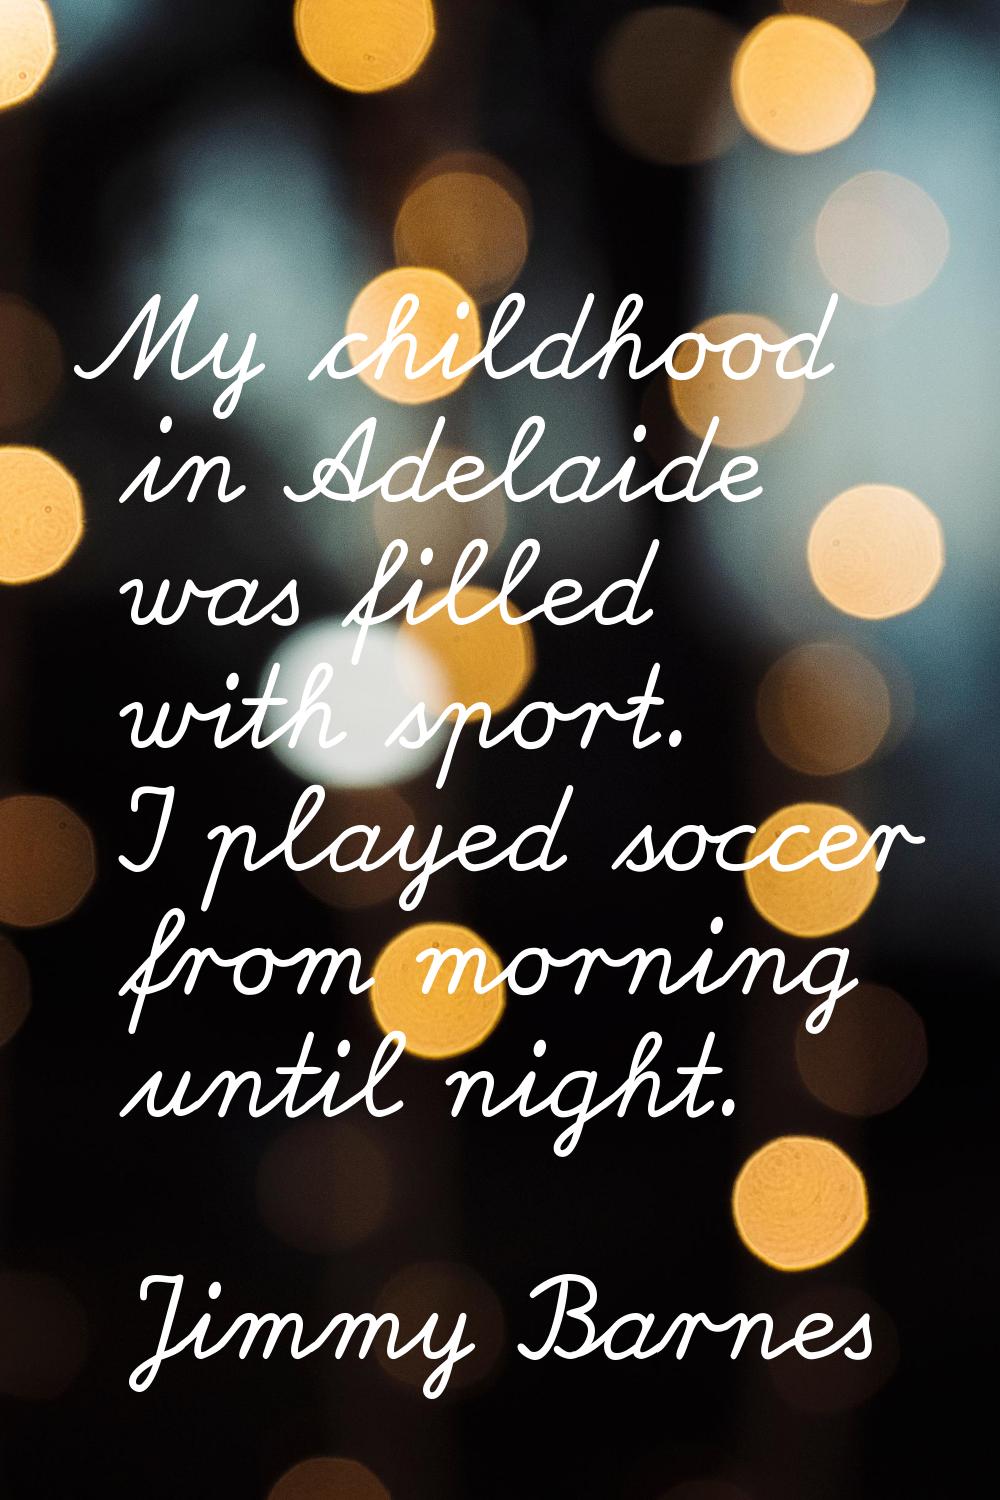 My childhood in Adelaide was filled with sport. I played soccer from morning until night.